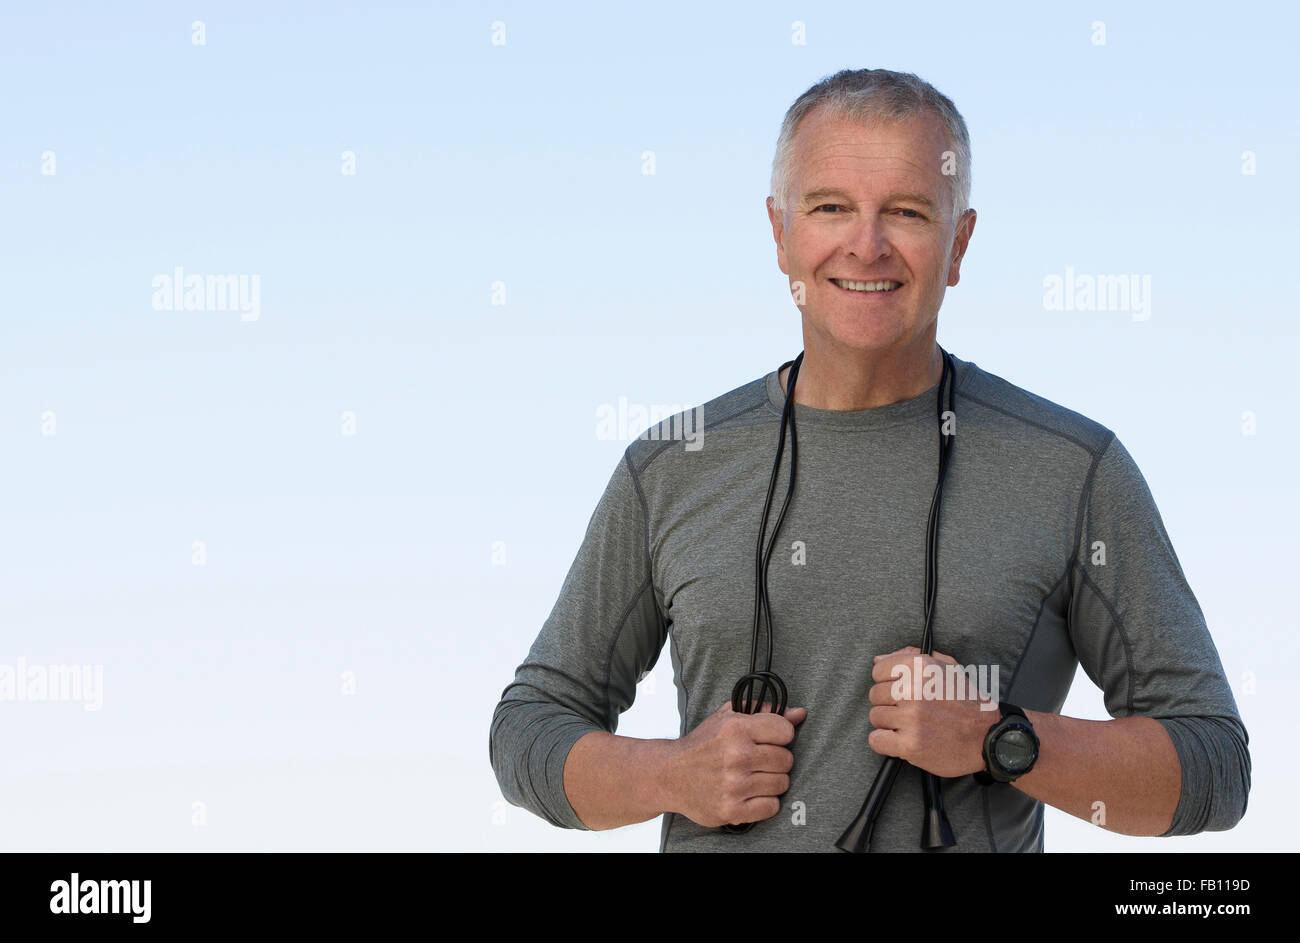 Man with jump rope against clear sky Stock Photo